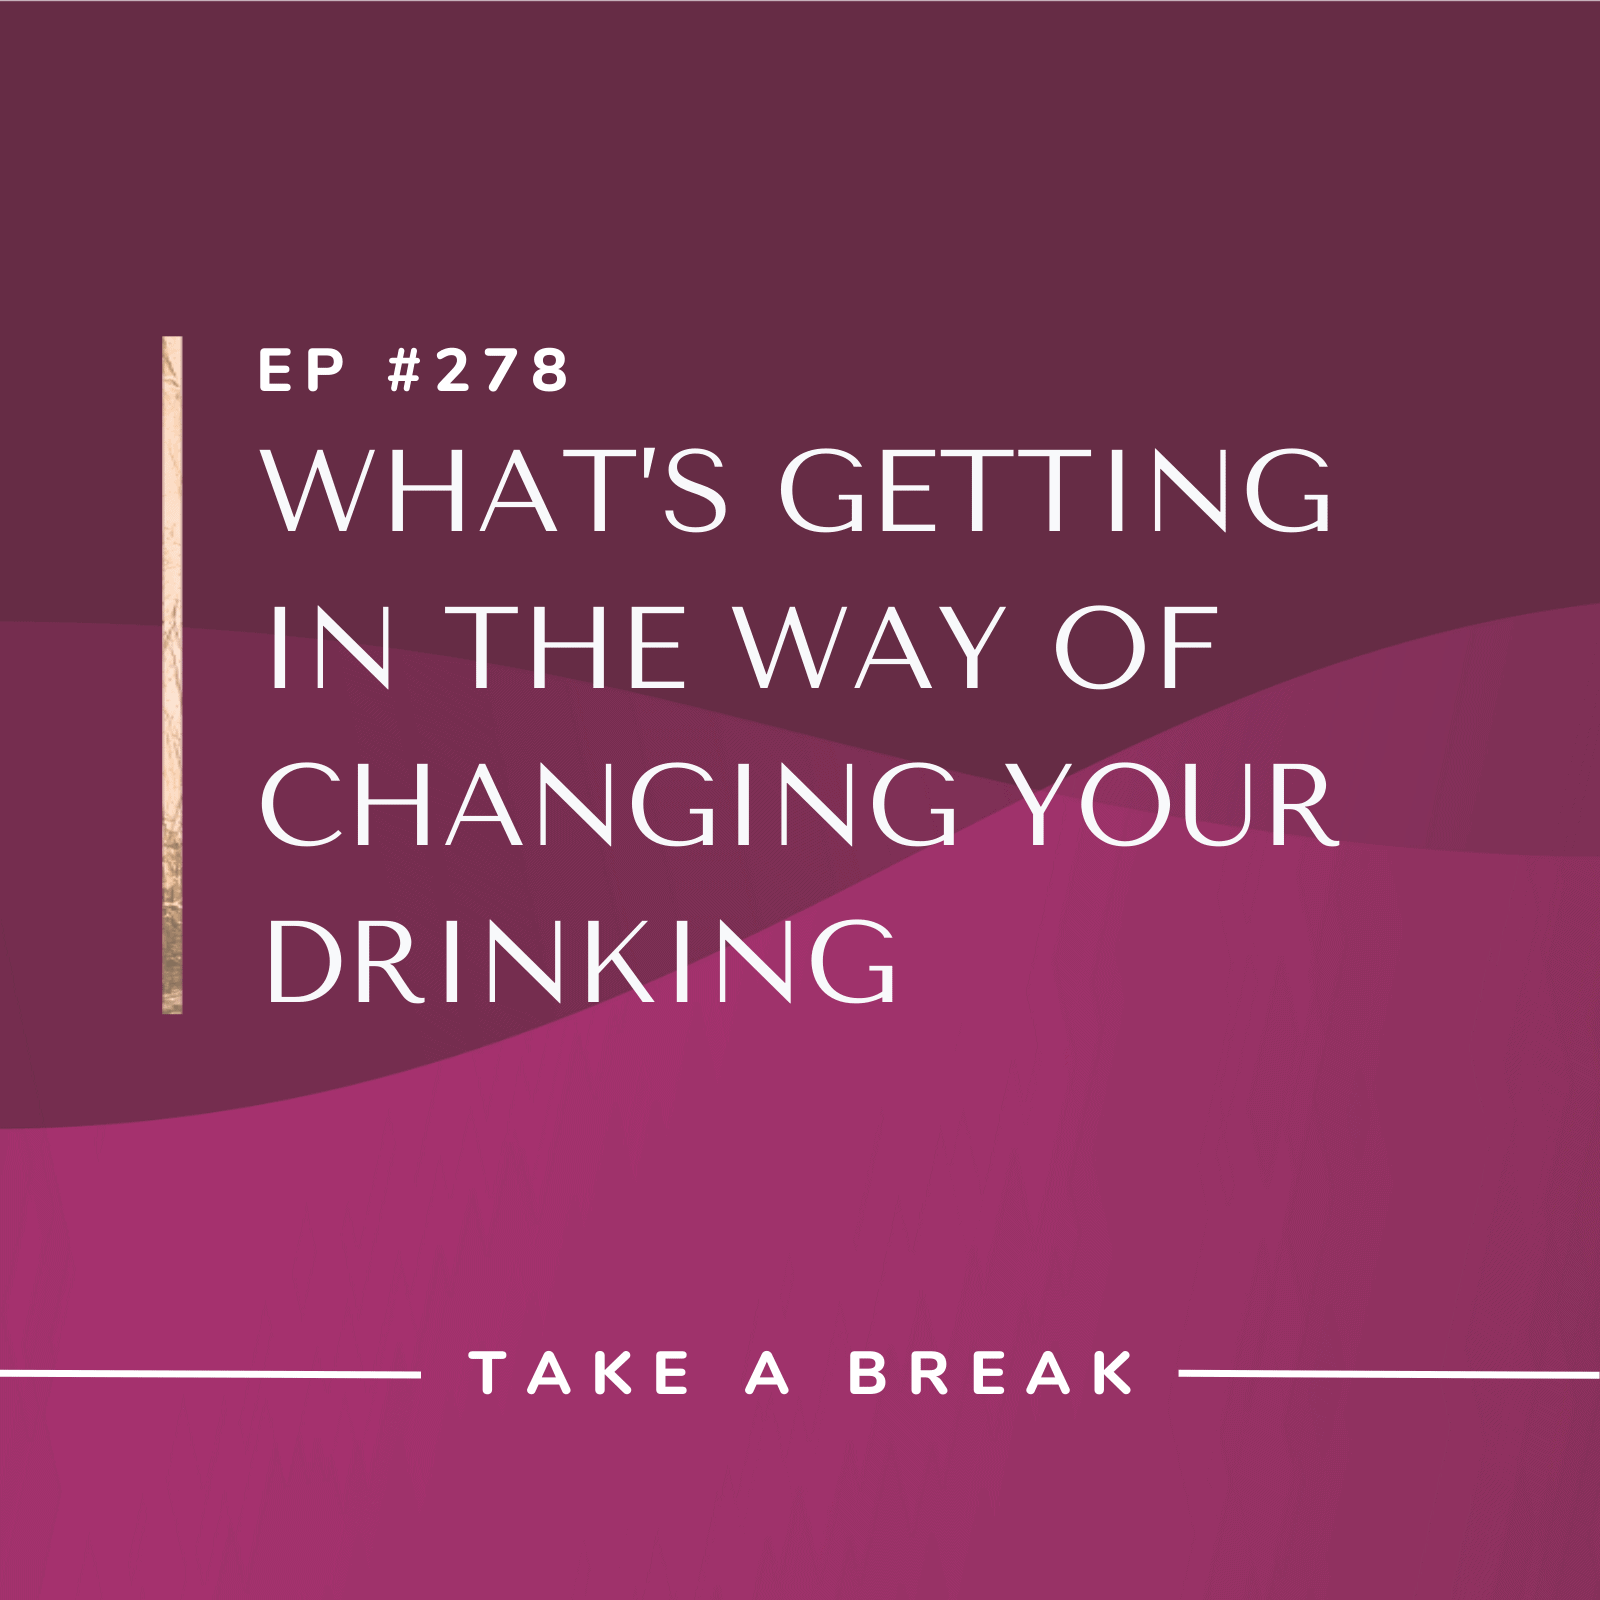 Take A Break from Drinking What’s Getting in the Way of Changing Your Drinking